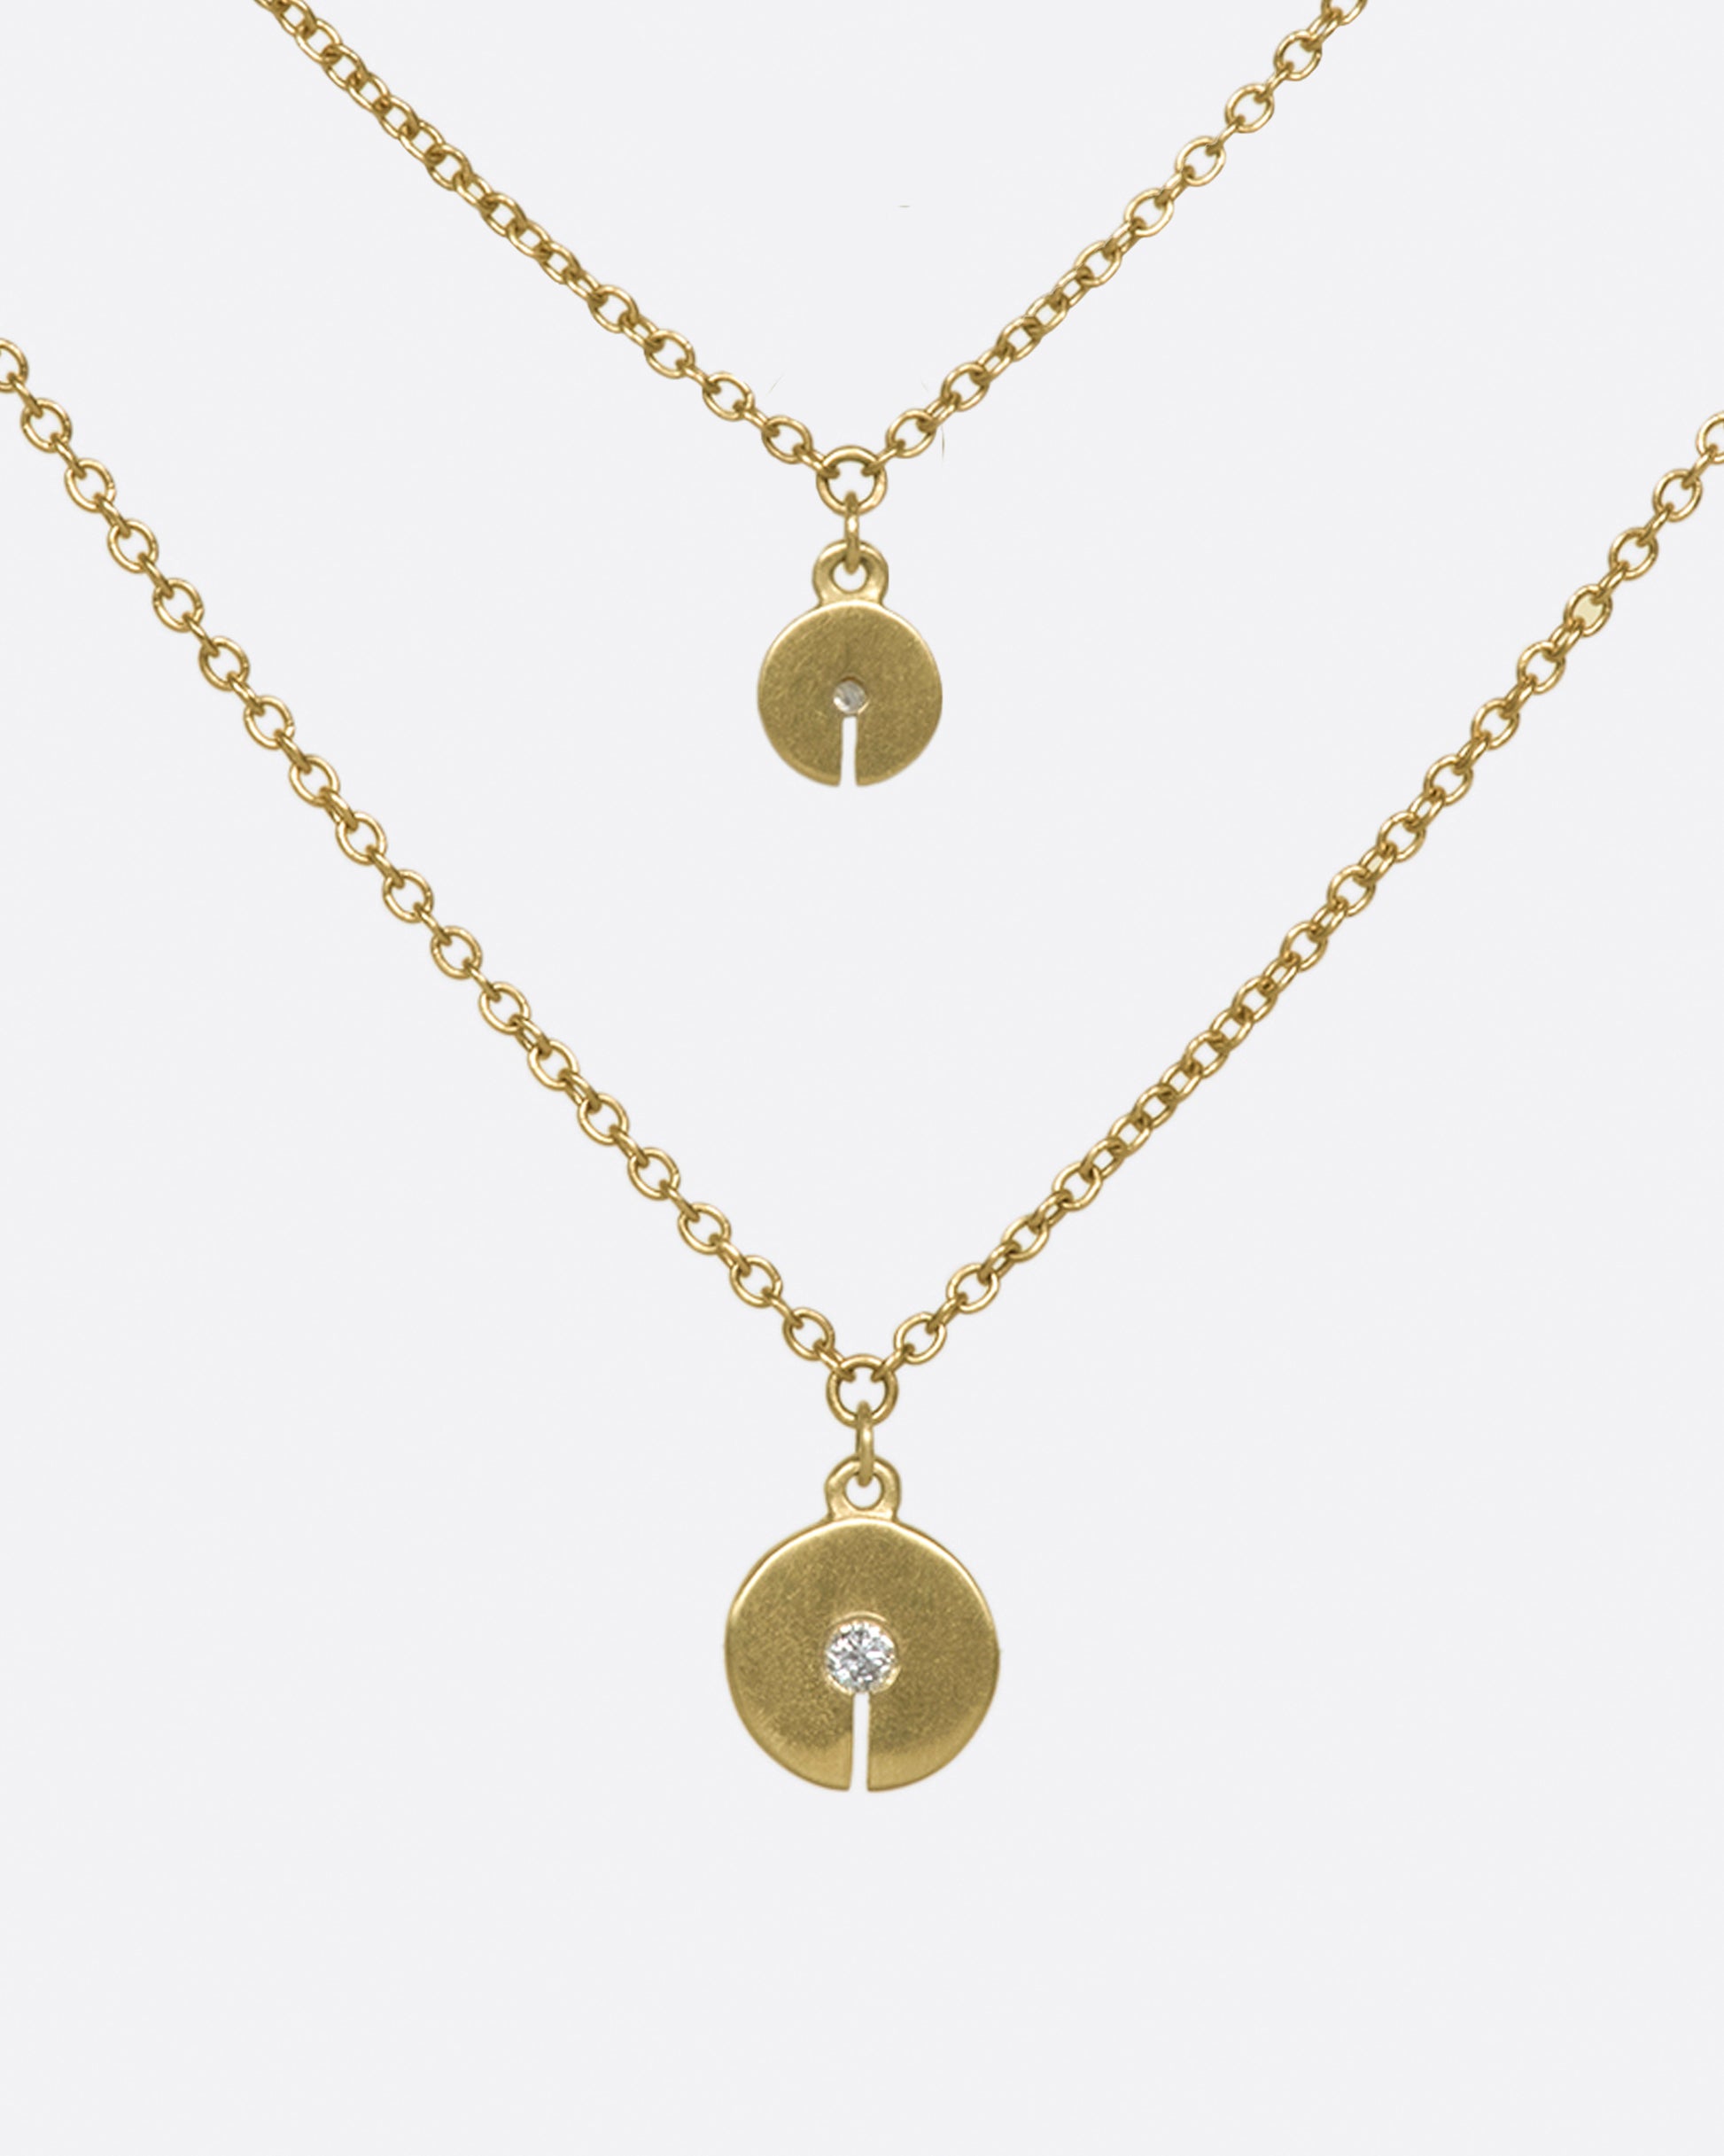 A double-layer 10K gold necklace with two grey diamond discs that elegantly dot your neck.